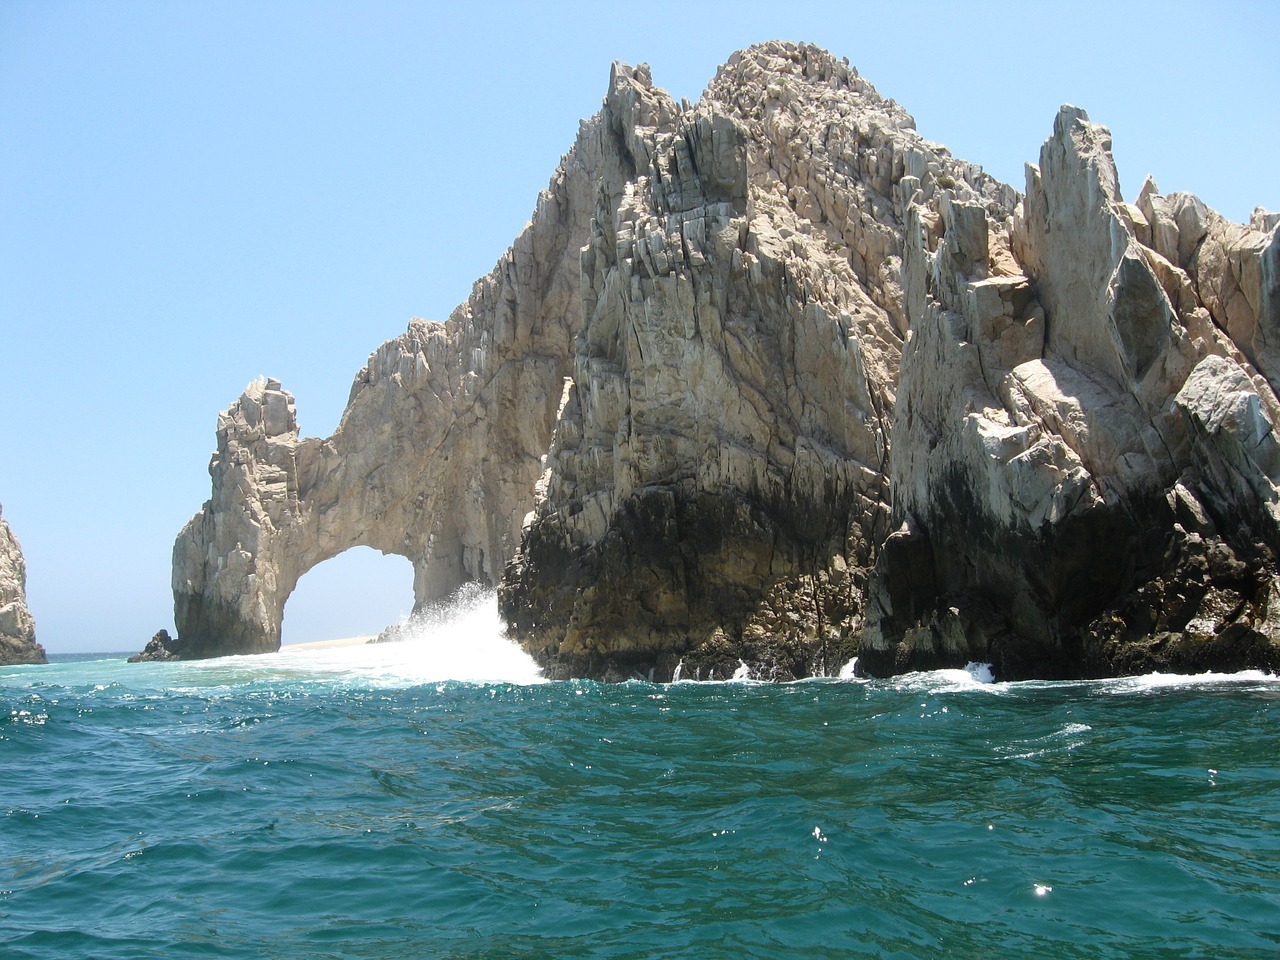 a large rock formation in the ocean with Arch of Cabo San Lucas in the background